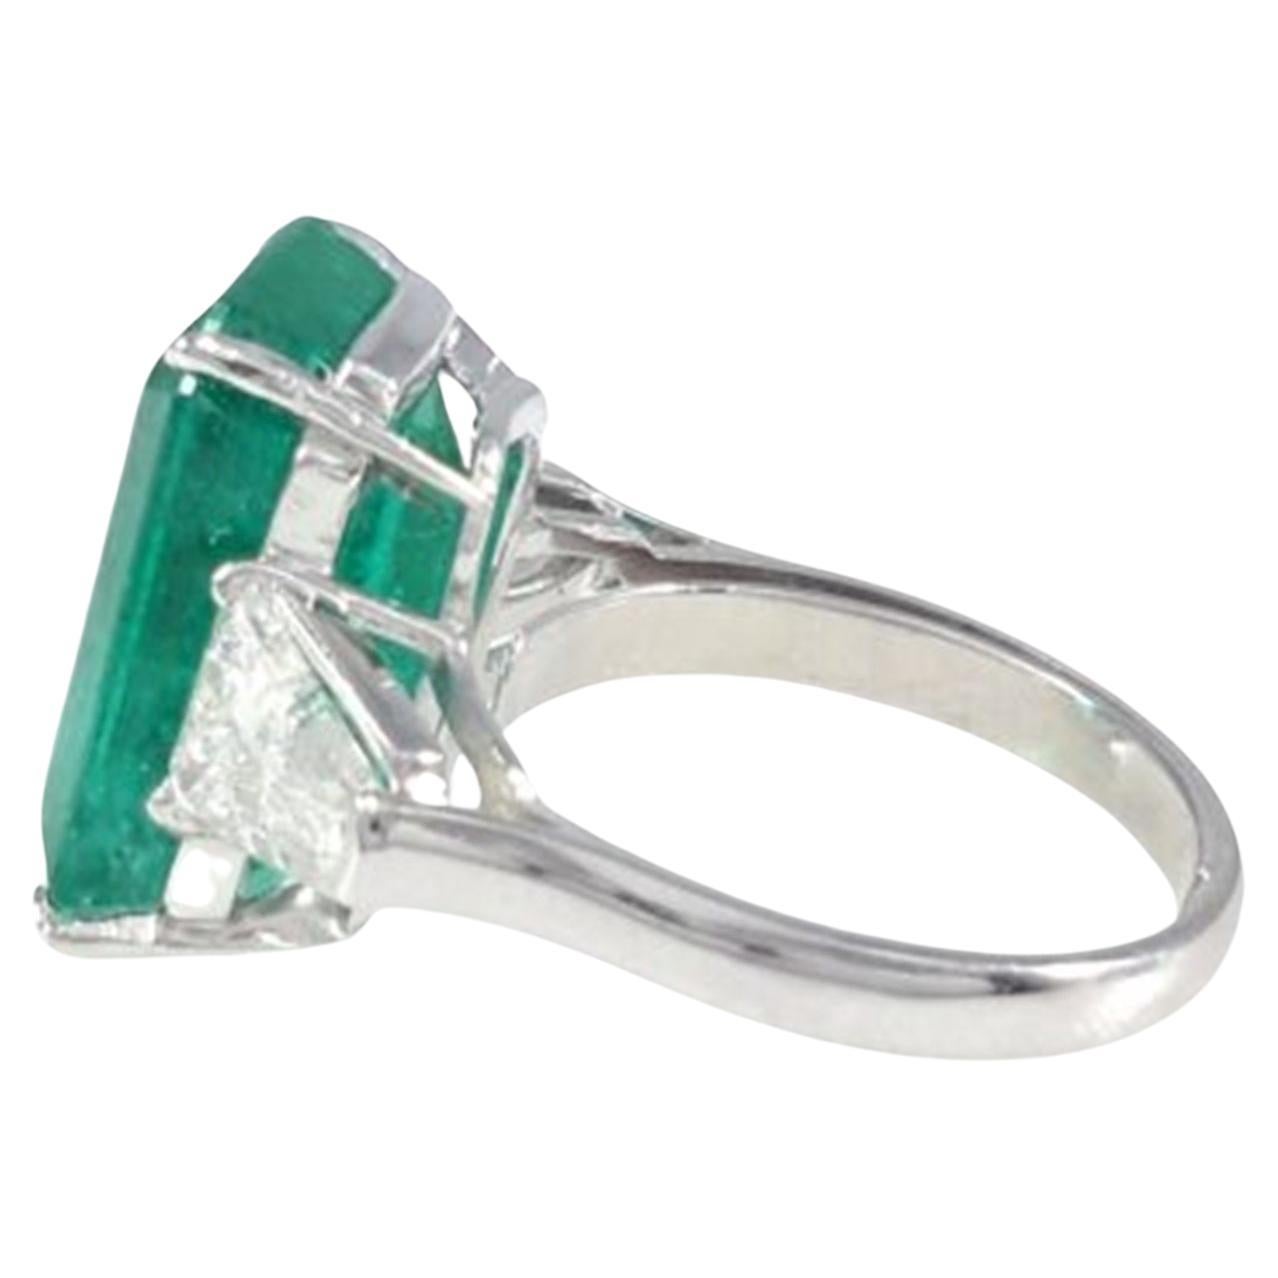  Magnificent 8 Carat Emerald Cut Emerald Ring!

Elevate your style with our breathtaking Emerald Cut Emerald Ring, a true masterpiece of unparalleled beauty and sophistication.

Stunning 8 Carat Emerald Cut Emerald: Embrace the mesmerizing allure of